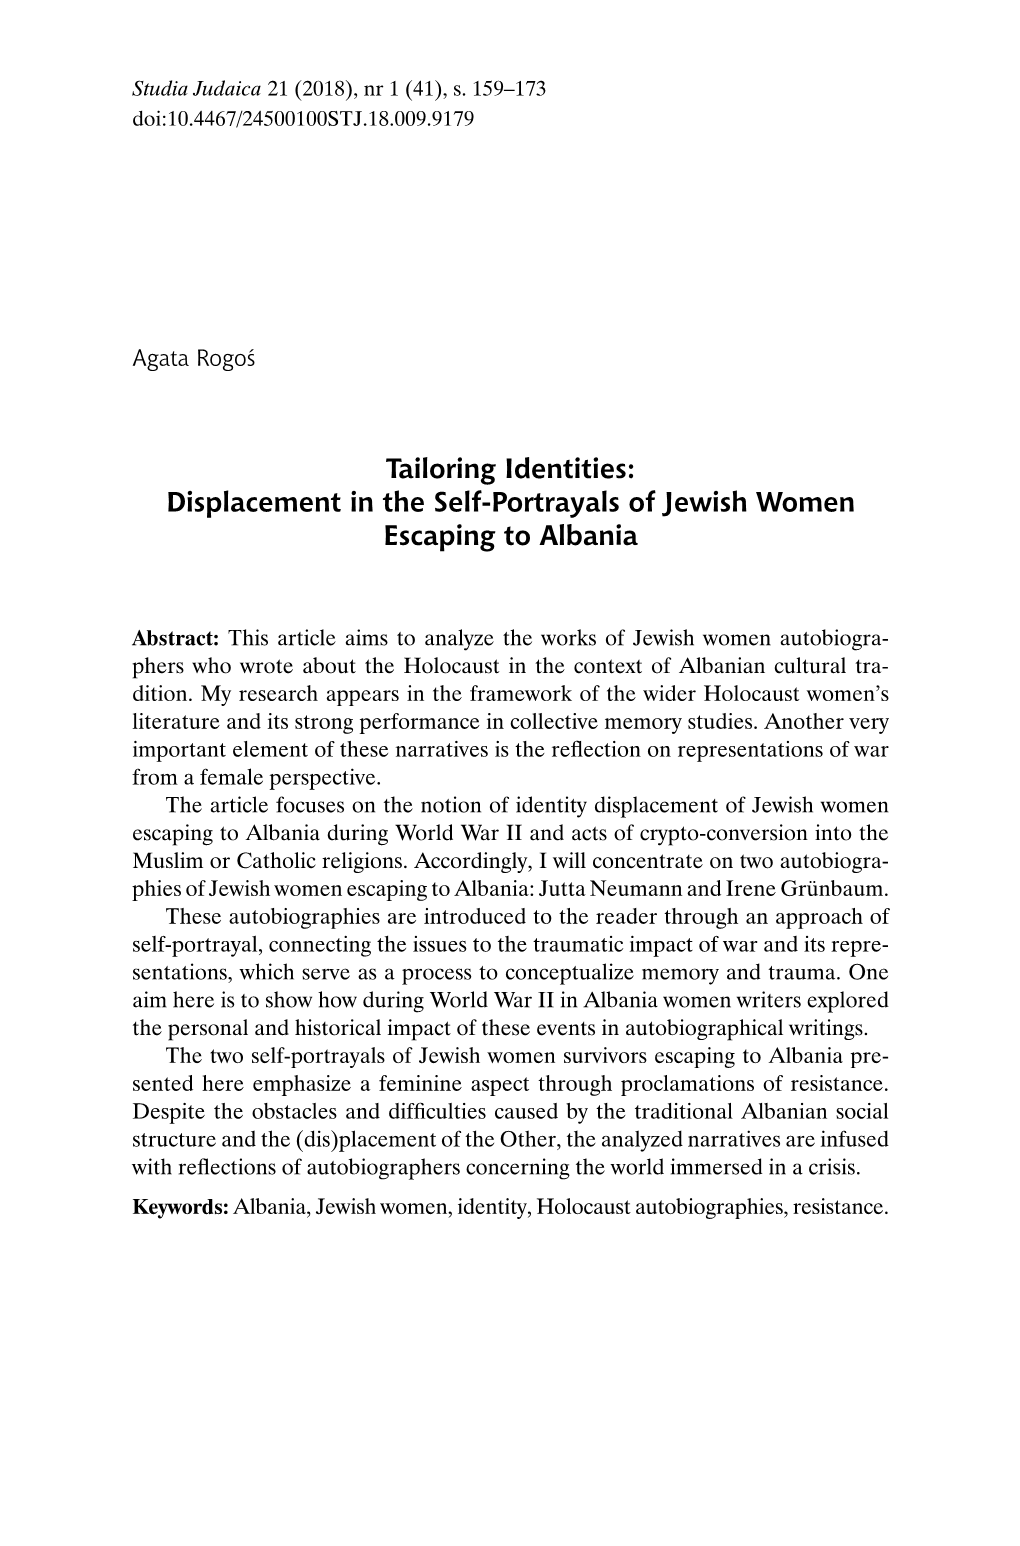 Displacement in the Self-Portrayals of Jewish Women Escaping to Albania